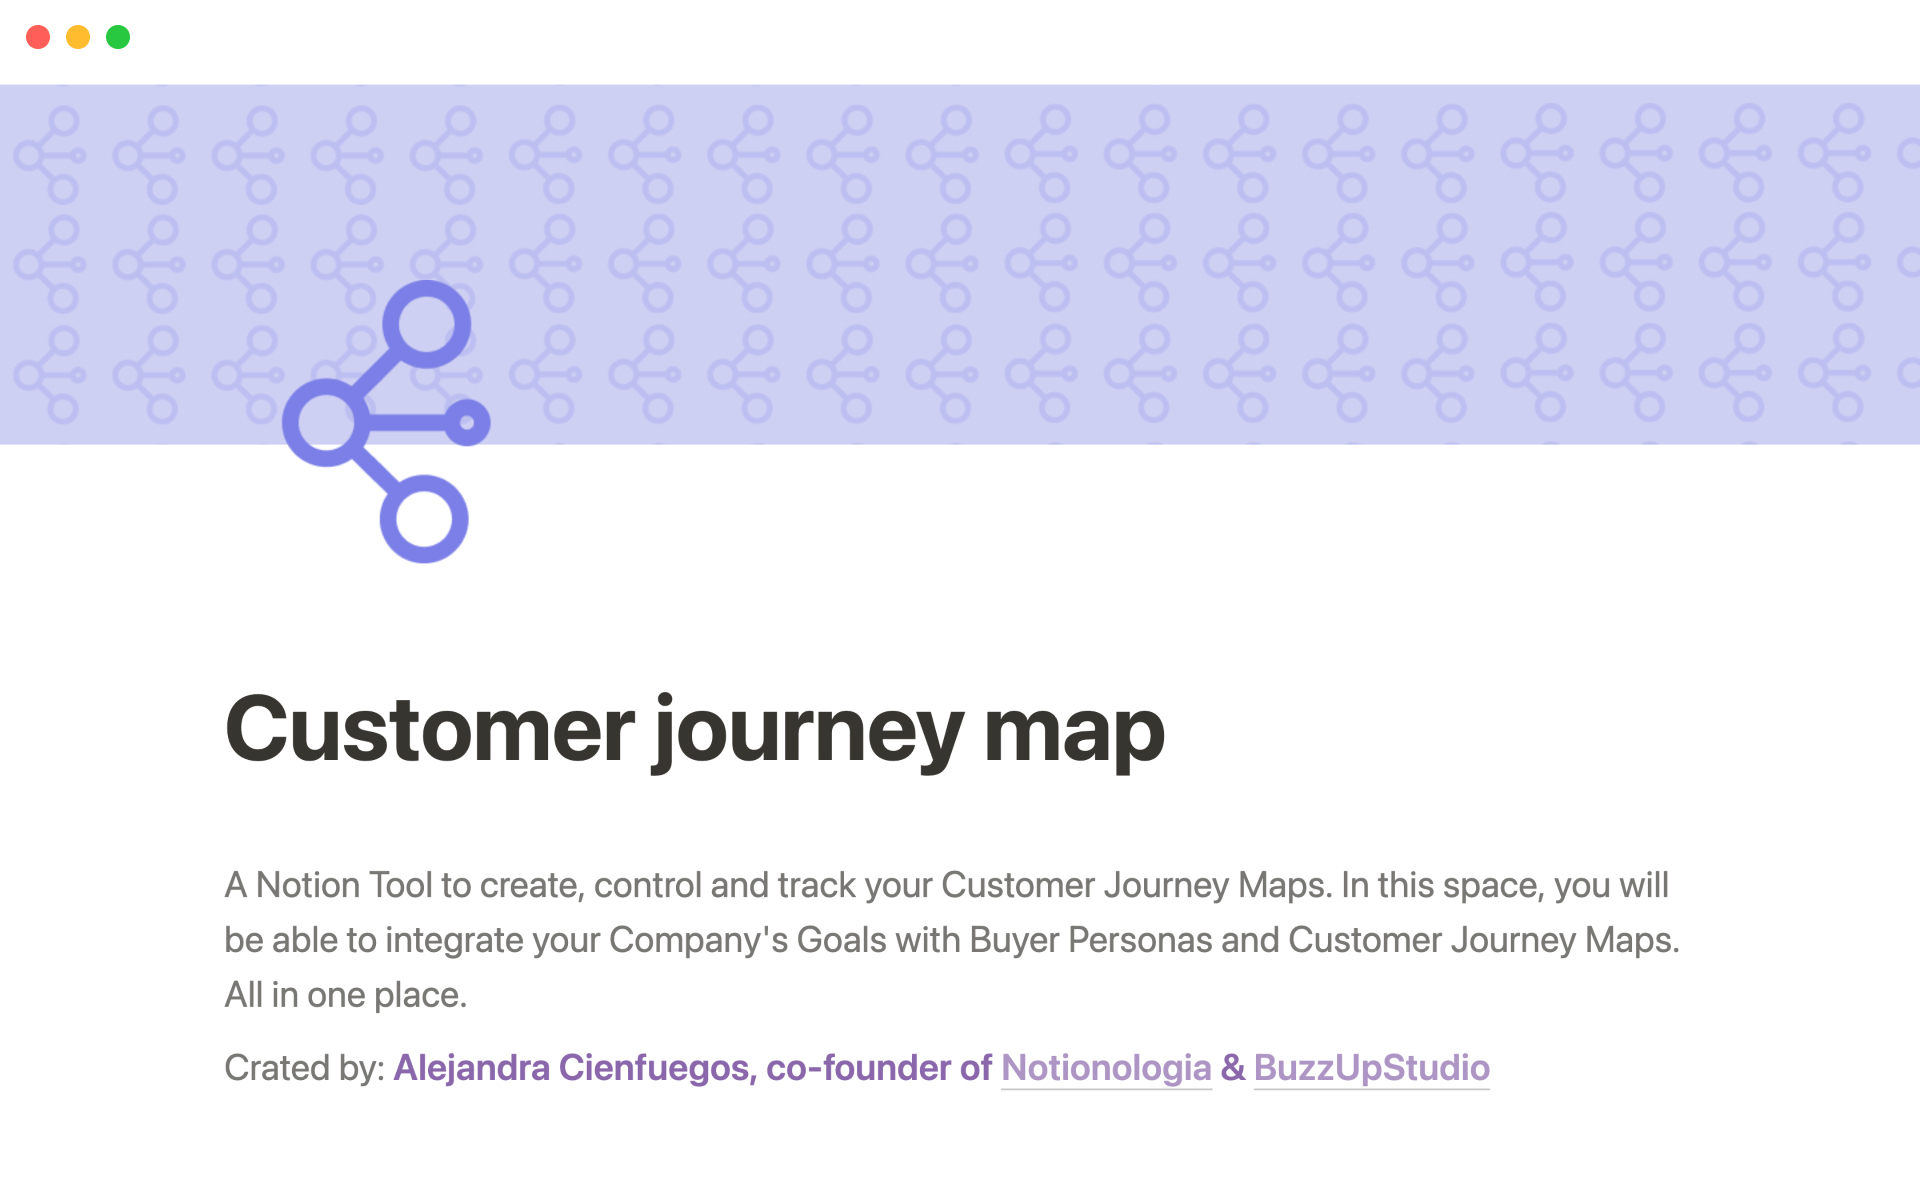 The desktop image for the Customer journey map template